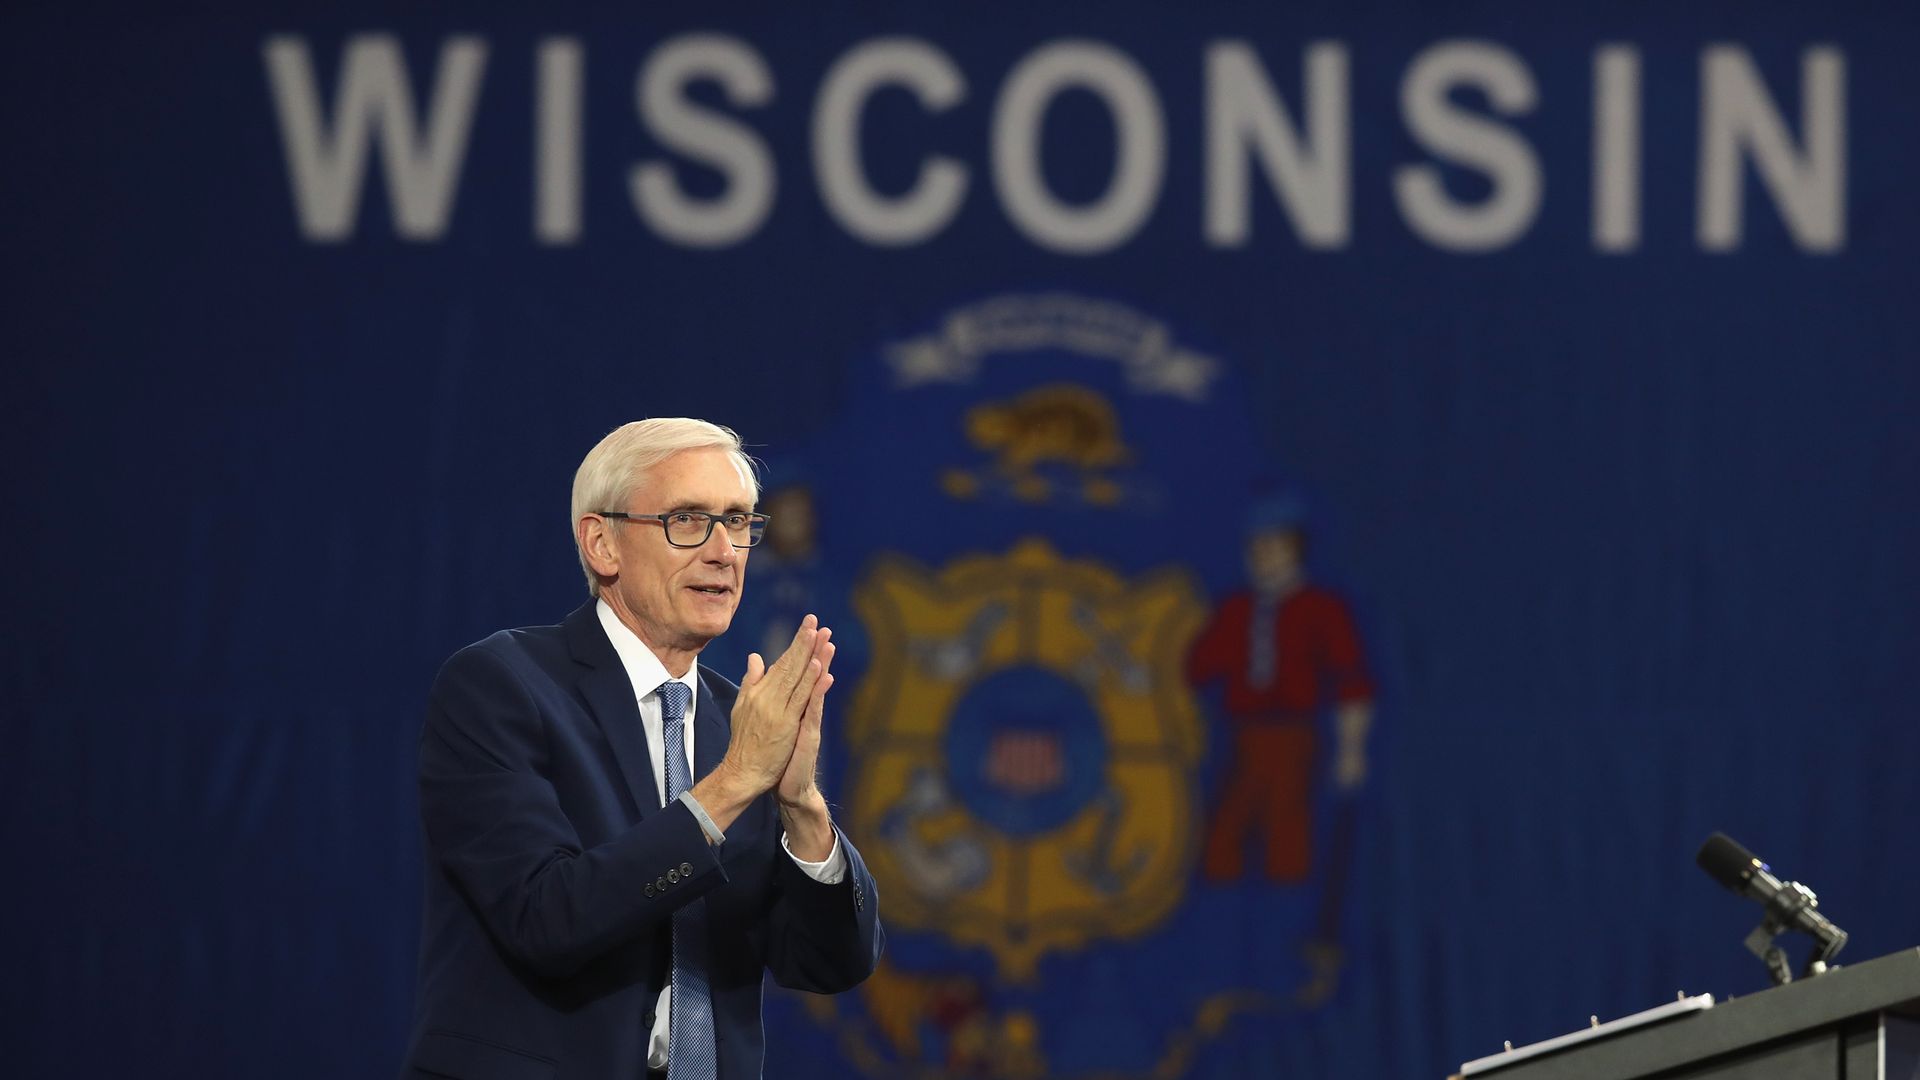 Gov. Tony Evers of Wisconsin is seen at a campaign rally in 2018.